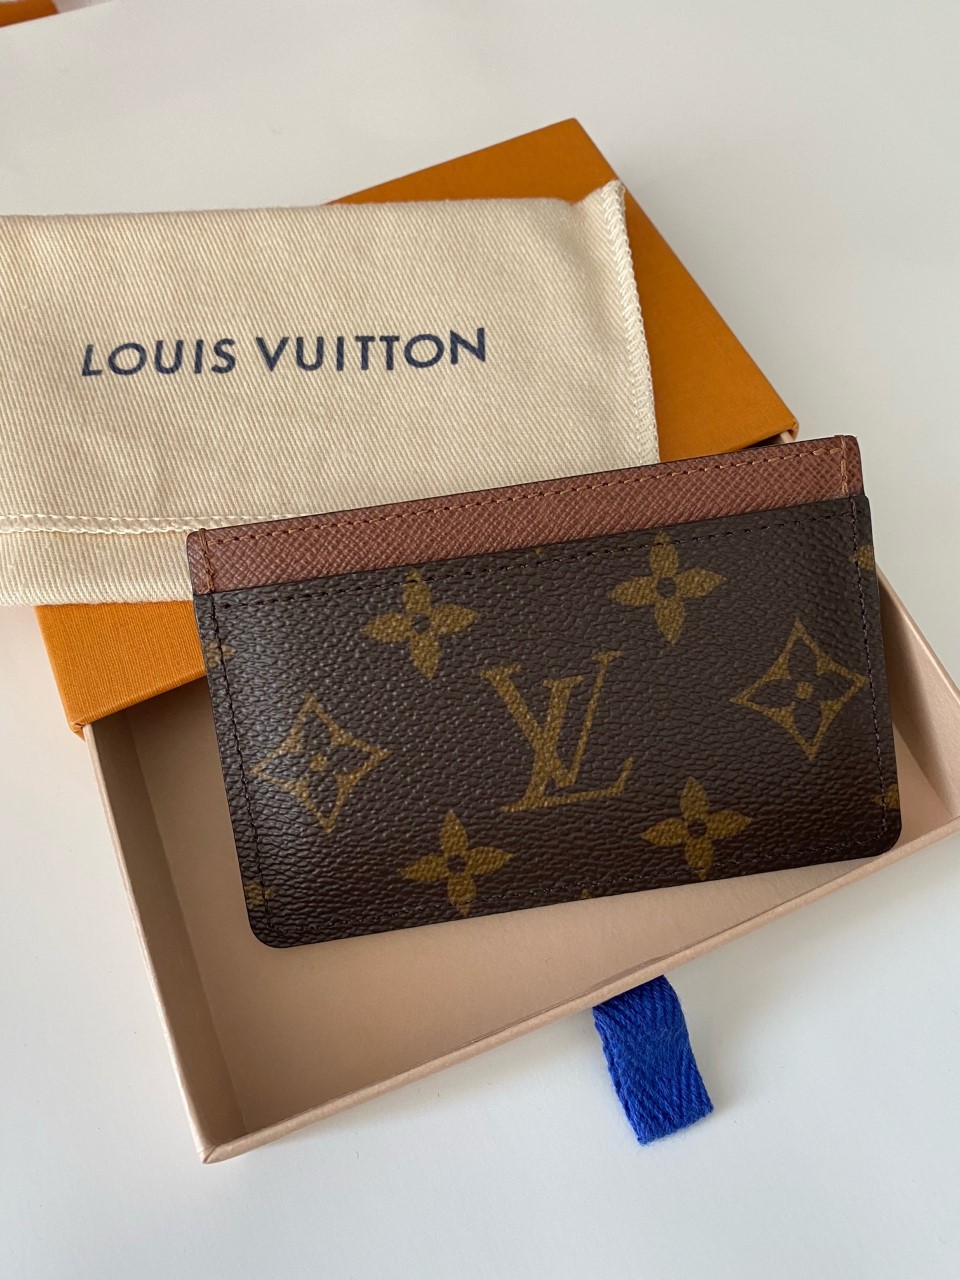 Discover Louis Vuitton Card Holder: This simple yet chic card holder in  Monogram canvas slips easily i…